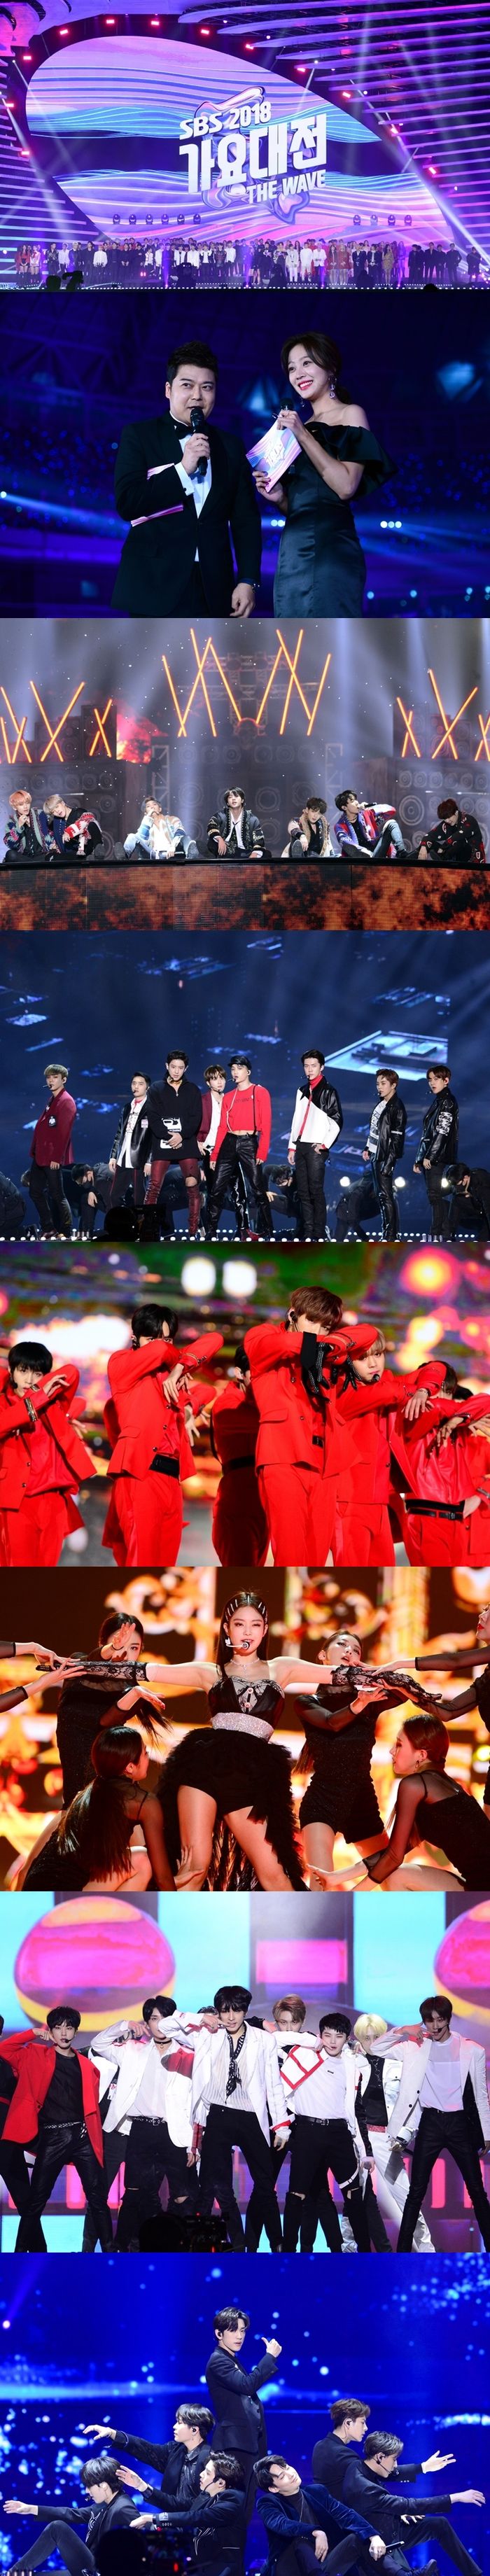 The 2018 SBS KPop year-end festival, which boasts a lineup of EXO, BTS, and Wanna One, was a spectacular end of the year.The 2018 SBS KPop year-end festival, which was broadcast live from 5:30 pm on the 25th at Gocheok Sky Dome in Seoul, was hosted by Jeon Hyun-moo and Jo Bo-a, while BTS, EXO, Wanna One, TWICE, Black Pink, REDVelvet, WINNER, Seventeen, More than twenty teams, including Monstar, NCT, Icon, Mamamu, Momo, GFriend, GodSeven, StrayKids, The Boyz, and (girls), gathered together to give a fantastic stage.The slogan for this years KPop year-end festival, which has attracted attention every year as a new subtitle, was The Wave (THE WAVE).As the popularity of Korean Wave singers centered on BTS was higher than ever before, it paid attention to the Korean Wave craze.KPop year-end festival has enriched the Christmas of viewers with its limited special stage KPop year-end festival which includes the past, present and future of Korean Wave along with the previous lineup and various stages that can look at the artists activities at once this year.The KPop year-end festival first marked the start of the festival with the stage of new artists who spent the year hot, including StrayKids, The Boyz, (girls) children, and Momo Land, in the NEW WAVE section.Following the stage of REDVelvet, Icon, and Apink, the cover stage of the hit songs of senior idols was also unfolded.In NEWTRO WAVE, REDVelvet and TWICE will collate with S.E.S.s Dreams come true, Monstar, Seventeen, and Wanna One will be the new retro retro stage for KPop year-end festival I set the stage.In addition, GFriend set up a sensible winter stage that opened Summer Summer Year as Winter Winter Year.EXOs Baek Hyun, Chen, Chan Yeol, and Dio appeared in a white suit on the stage where the Land piano was placed, and called the Miracle of December to raise the year-end atmosphere to the fullest.The first part of KPop year-end festival was finished with hip-hop.Through LEGENDARY WAVE, Korea Hip Hops Origin, Tiger JK, Yoon Mi-rae and Beeji decorated the first part ending.Followed by Mama Mu Moon, Apink Bomi, GFriend Galaxy, and TWICE Dahyun announced the start of the second part with the cover stage of Big Bangs Flower Road.In the GLOBAL WAVE section, representative vocals of the group such as God Seven JB, Wanna One Kim Jae Hwan, WINNER Kang Seung-yoon, NCT Doyoung and Seventeen Dogum appeared.They showed Queens DONT STOP ME NOW, which has gained popularity beyond generations through movies, and attracted attention by directing the stage where singing ability stands out.On the other hand, the main character who won the best one minute with 9.4% of the audience rating (Nilson Korea, Seoul Capital Area aggregate) was WINNER Song Min-ho who first released the solo new song Jeroen Perceval stage in KPop year-end festival.Song Min-ho, who appeared in colorful yellow costumes and took control of the stage with a unique charisma, caught the eye and followed by a solo song Annun.It then boosted the atmosphere with the Millions, which was presented with WINNER members.This was not the only first release: Seventeens debut title song CALL CALL CALL!, KPop year-end festival for the first time, the fans focused their attention.The stage of BTS, a global star who had the best year of the year, also continued.Fascinated by the former World, BTS proved popular with its medley of six hits at the KPop year-end festival.BTS started its debut song No more Dream on the day, and it showed a stage reminiscent of a concert hall with colorful performance including Sang Man, Kaer, Burning, DNA, Idol.The ending of the KPop year-end festival was decorated by EXO, which led to the peak of the fever of the Gocheok Dome with Love Shot and Tempo.EXO has completed the 2018 SBS KPop year-end festival with perfect finishing of stage design using motorcycle and sophisticated performance.According to Nielsen Korea, 2018 SBS KPop year-end festival was the 2049 audience rating 5.1%, which proved to be the top audience rating in all programs of terrestrial, comprehensive channels and cable channels.Household ratings soared to 7.4 percent and up to 9.4 percent (based on the second part of the Seoul Capital Area).On the other hand, SBS, which opened the festival with KPop year-end festival this year, will review the SBS programs and dramas that have been loved by viewers in 2018 through Entertainment Grand Prize on the 28th (Friday) and Smoke Grand Prize on the 31st (Monday).